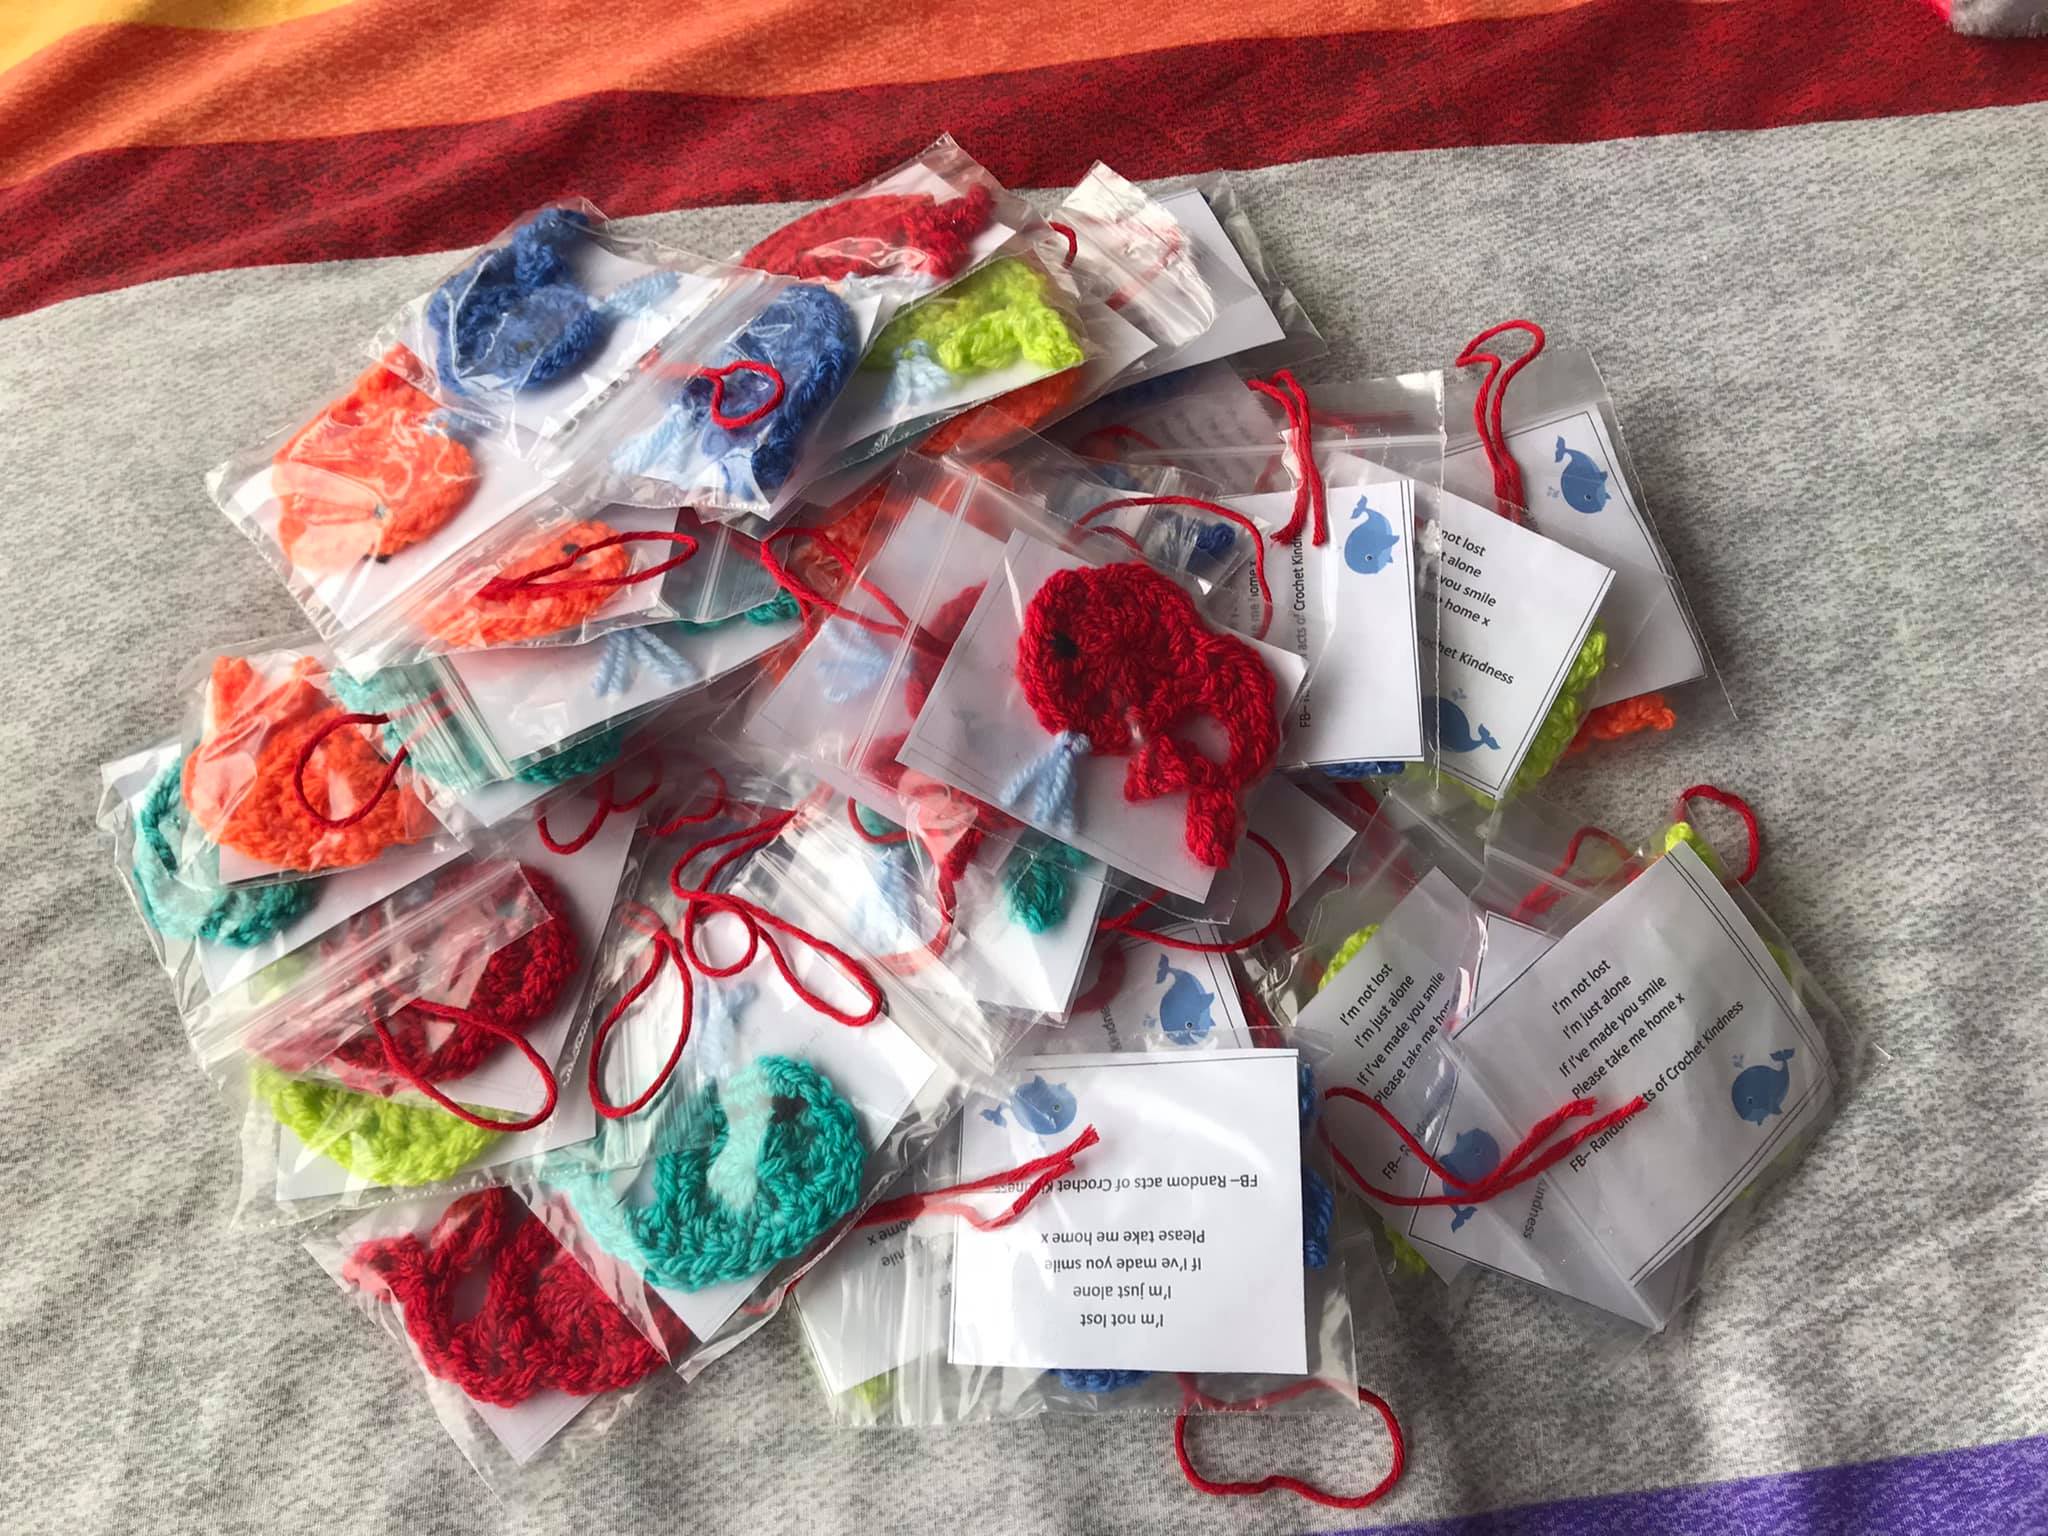 The woman who leaves 'random acts of crochet kindness' to make the